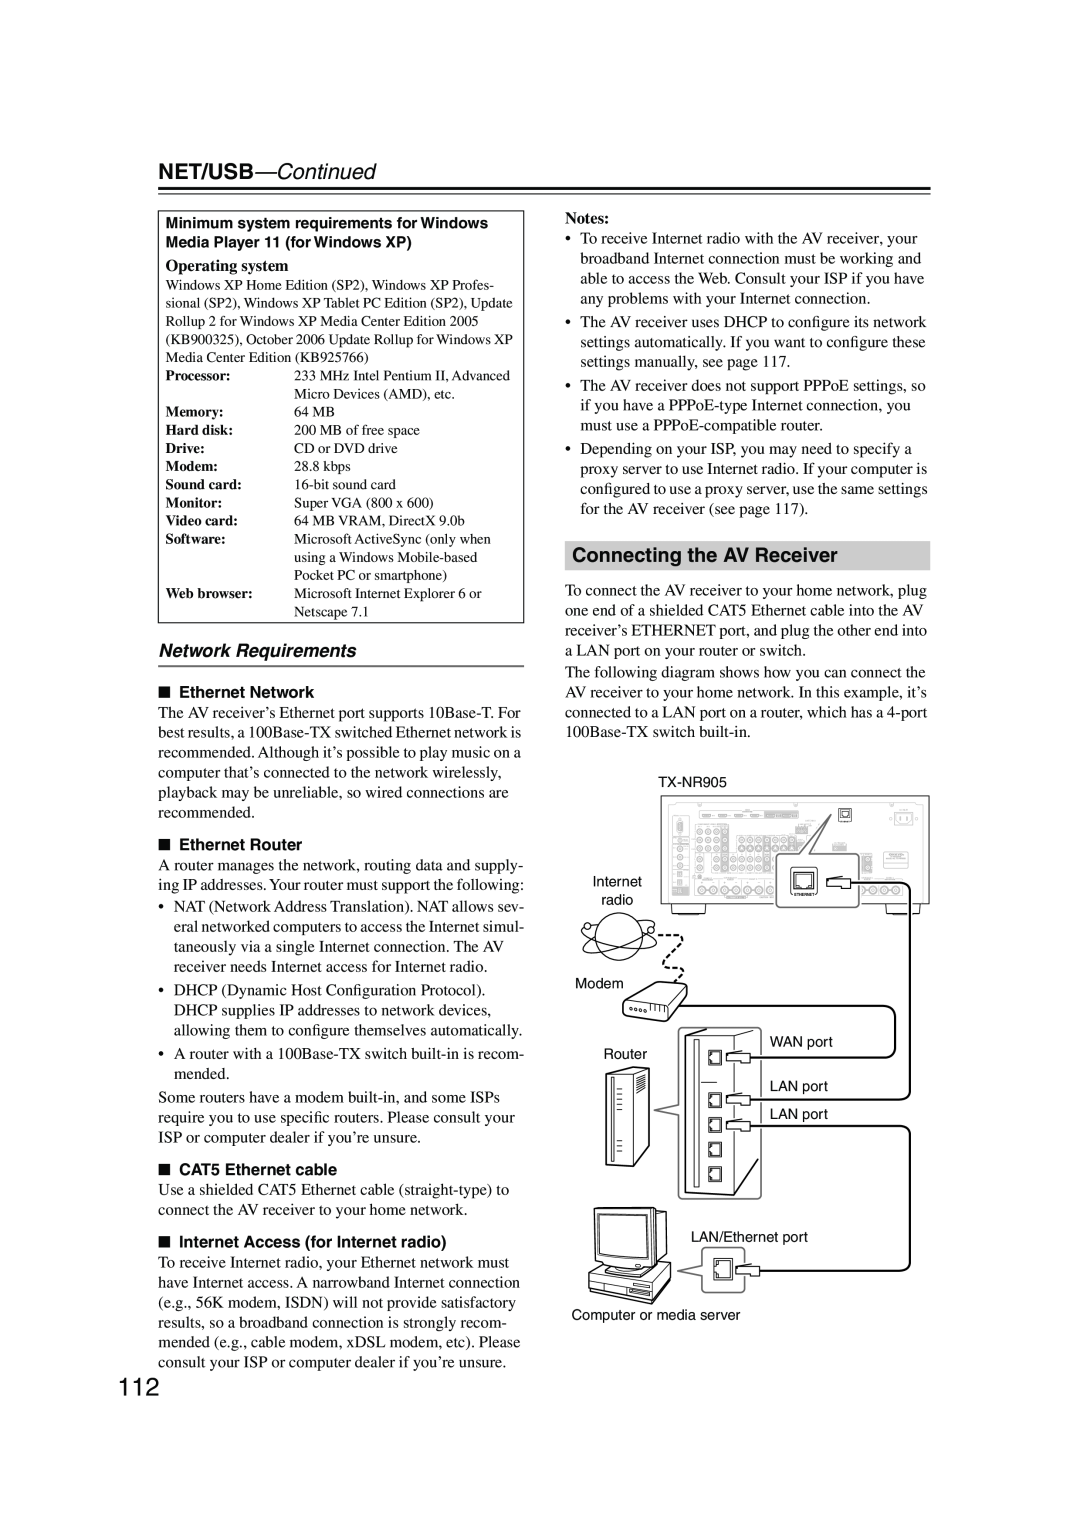 Onkyo TX-NR905 instruction manual NET/USB—Continued, Connecting the AV Receiver, Network Requirements, Operating system 